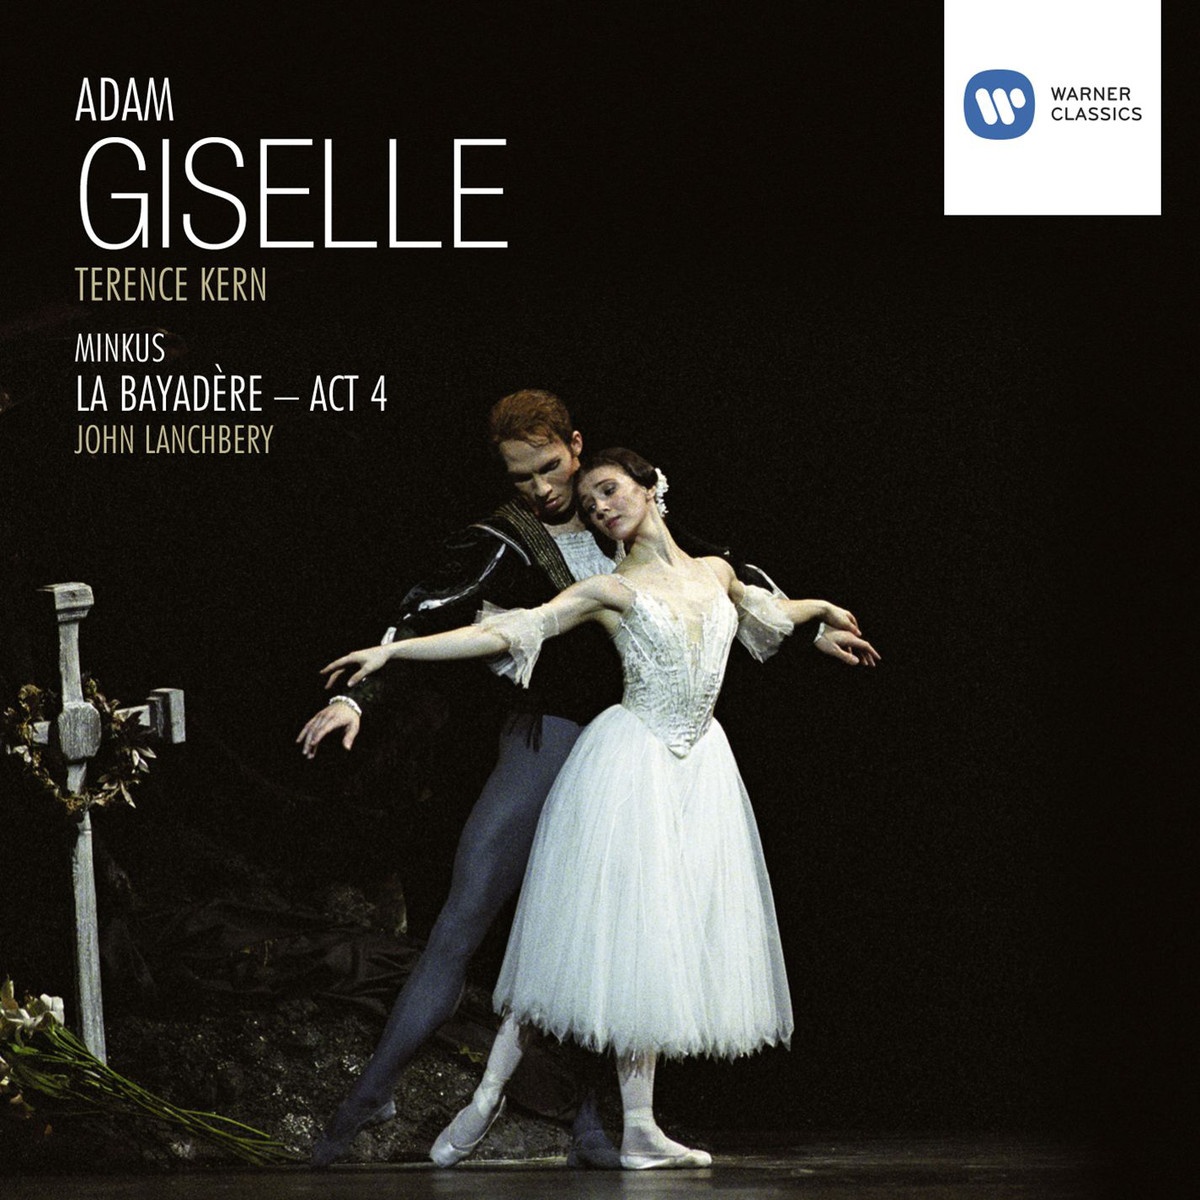 Giselle (1996 Digital Remaster), Act II: No.10 Giselle appears